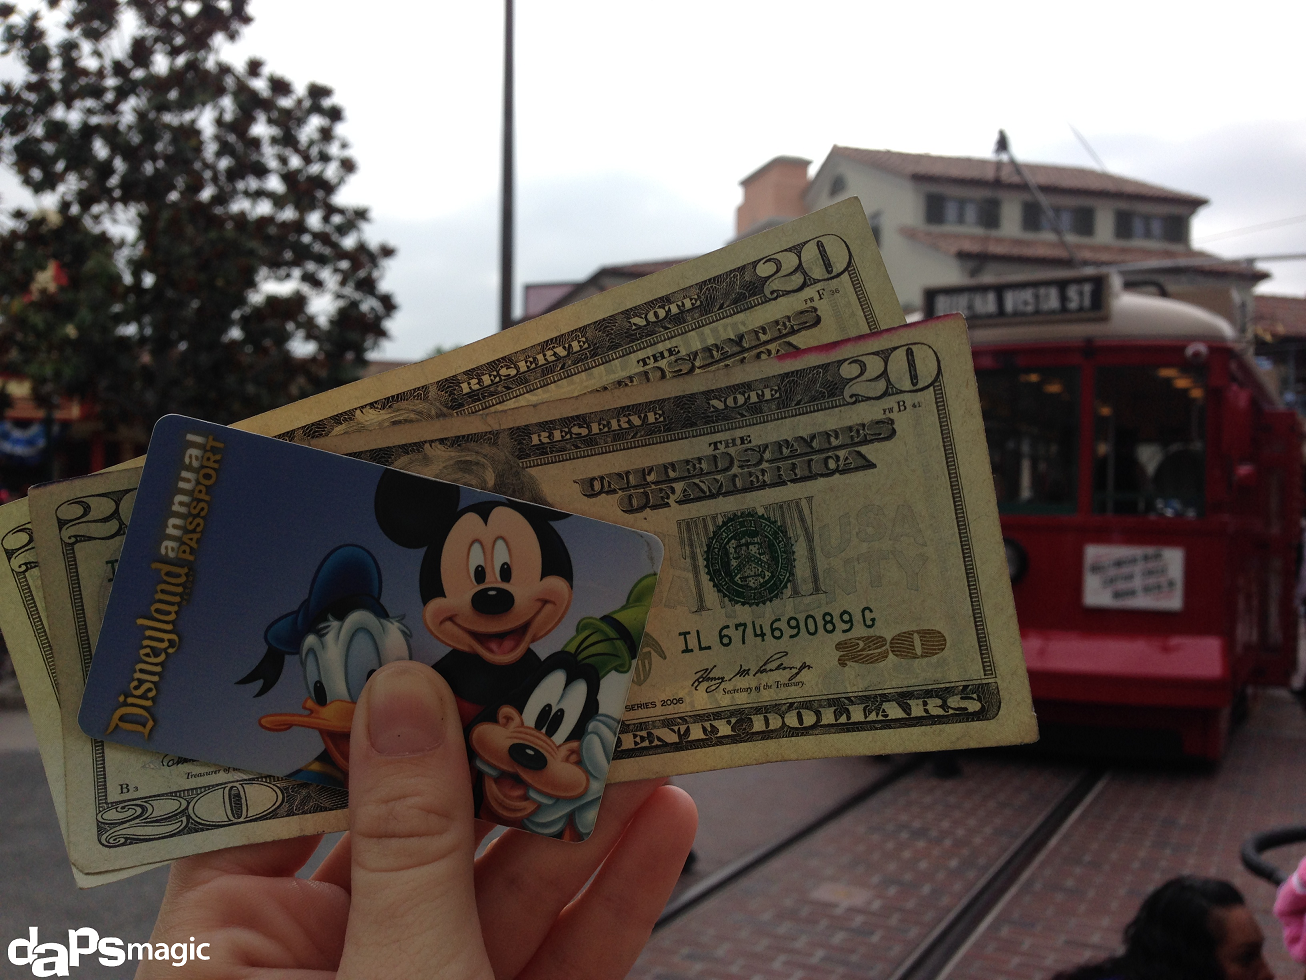 Is it Possible to Only Spend $40 on Food & Drink During an All Day Disneyland Resort Visit?